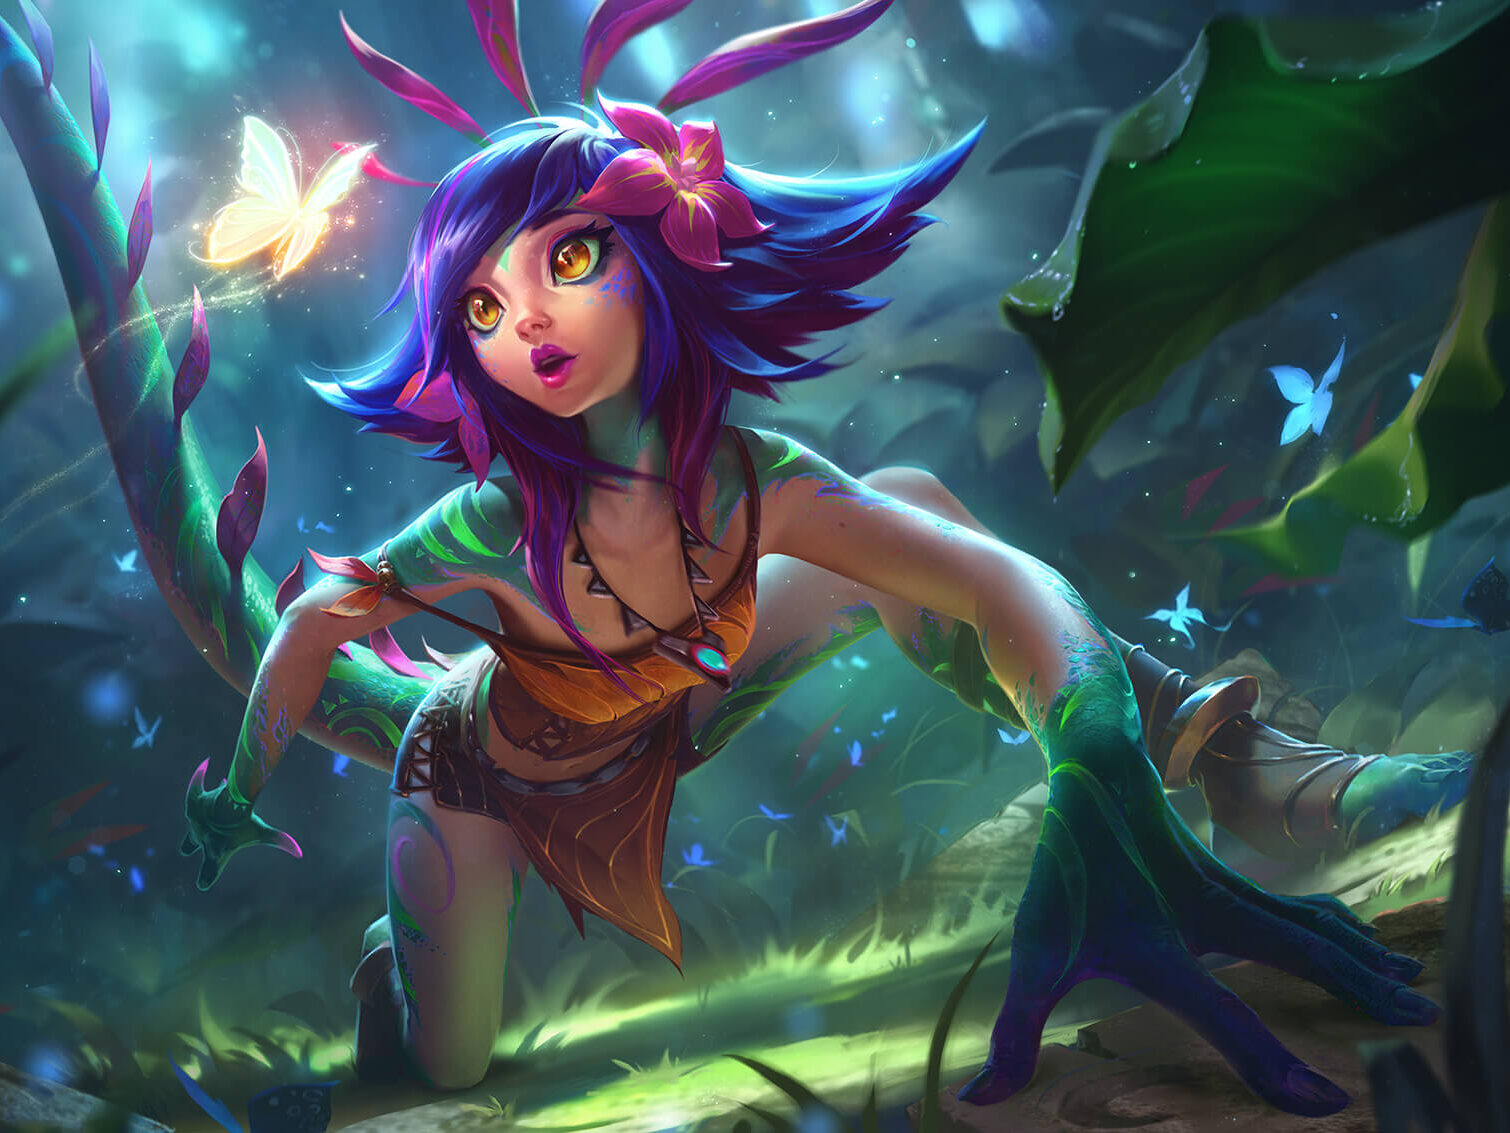 Riot MMO Faction Oovi-Kat tribe with member Neeko in the jungle looking at a glowing butterfly